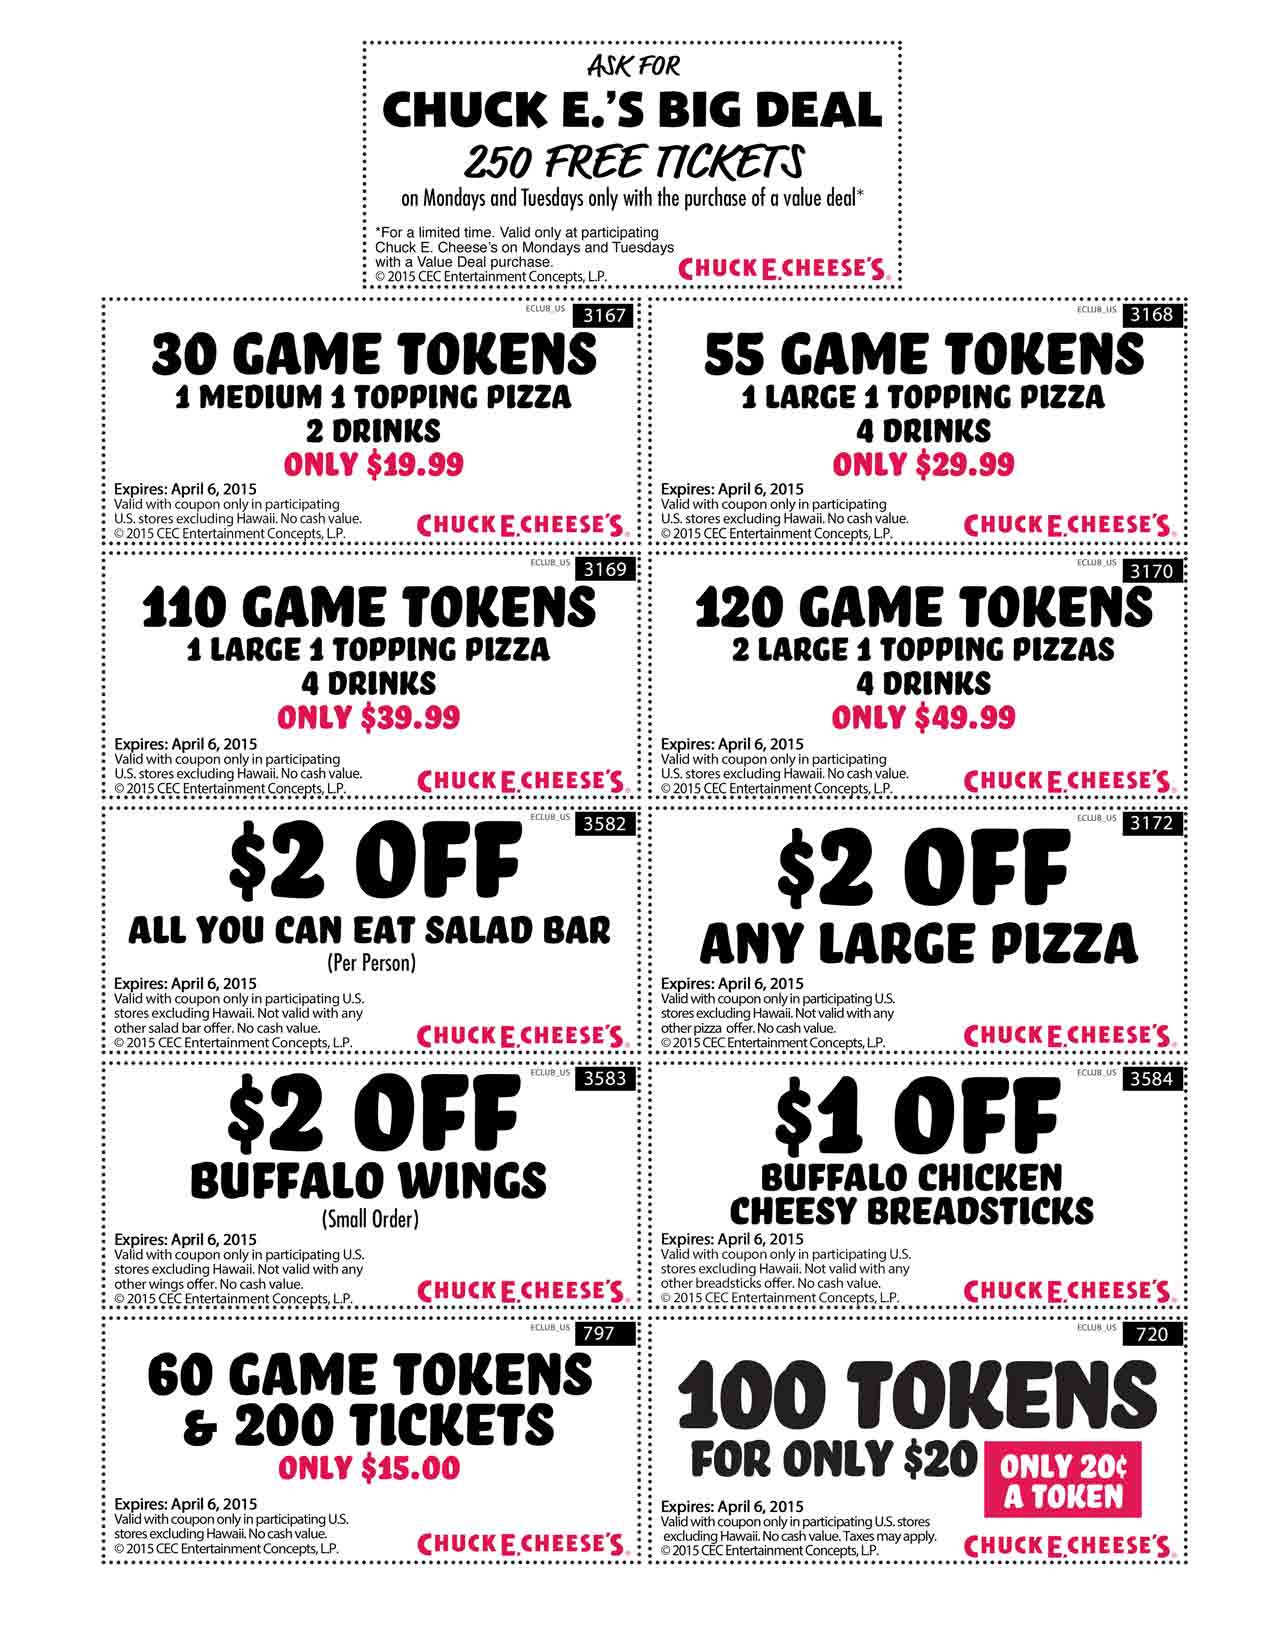 Chuck E. Cheese Coupon April 2024 250 free tickets, 100 tokens for $20 & more at Chuck E. Cheese pizza